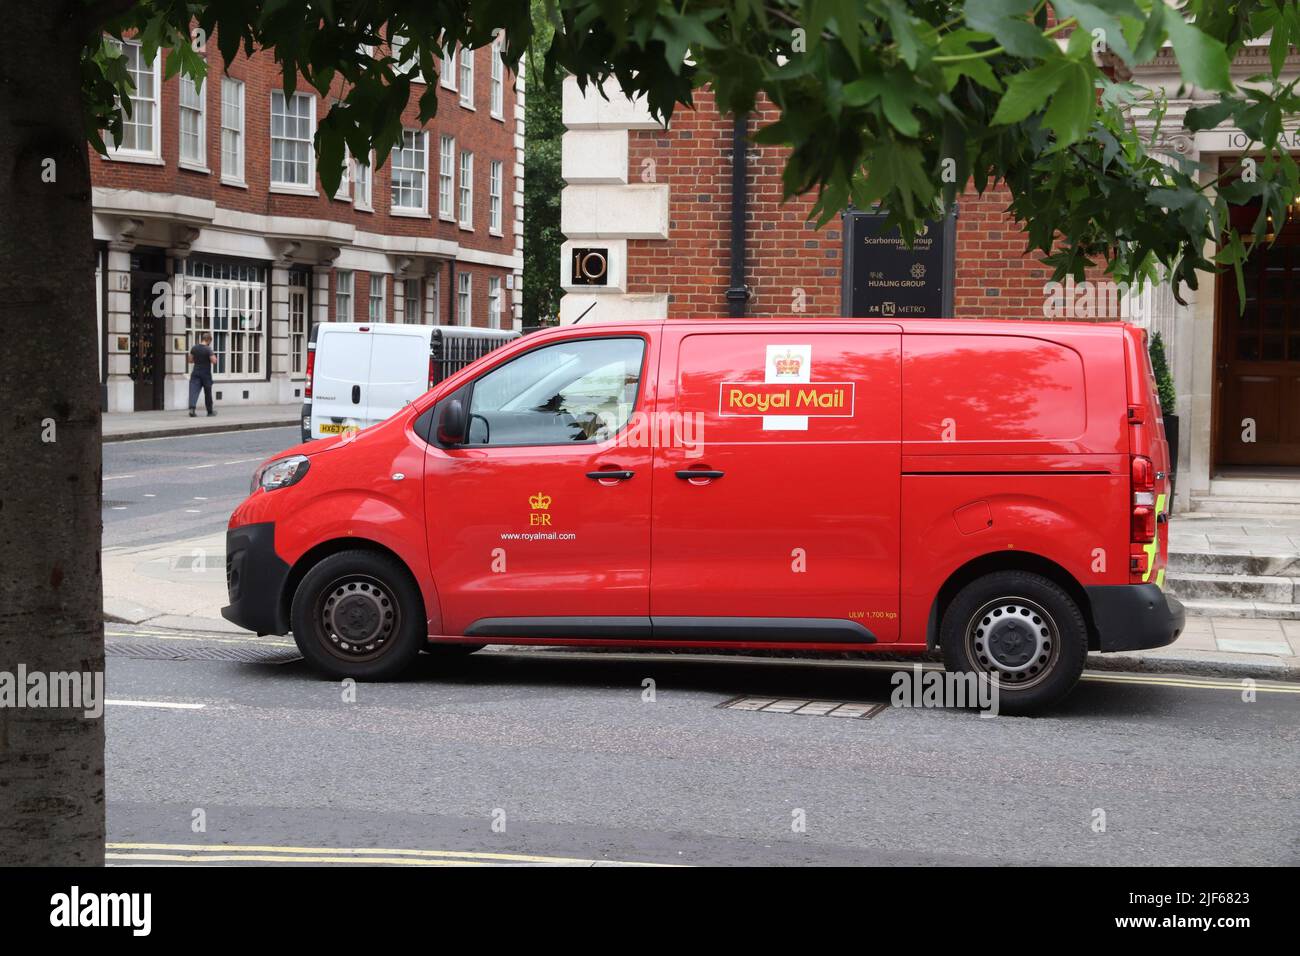 LONDON, UK - JULY 15, 2019: Royal Mail delivery van Peugeot Expert in London, UK. Royal Mail was founded in 1516. It employs 160,000 people. Stock Photo